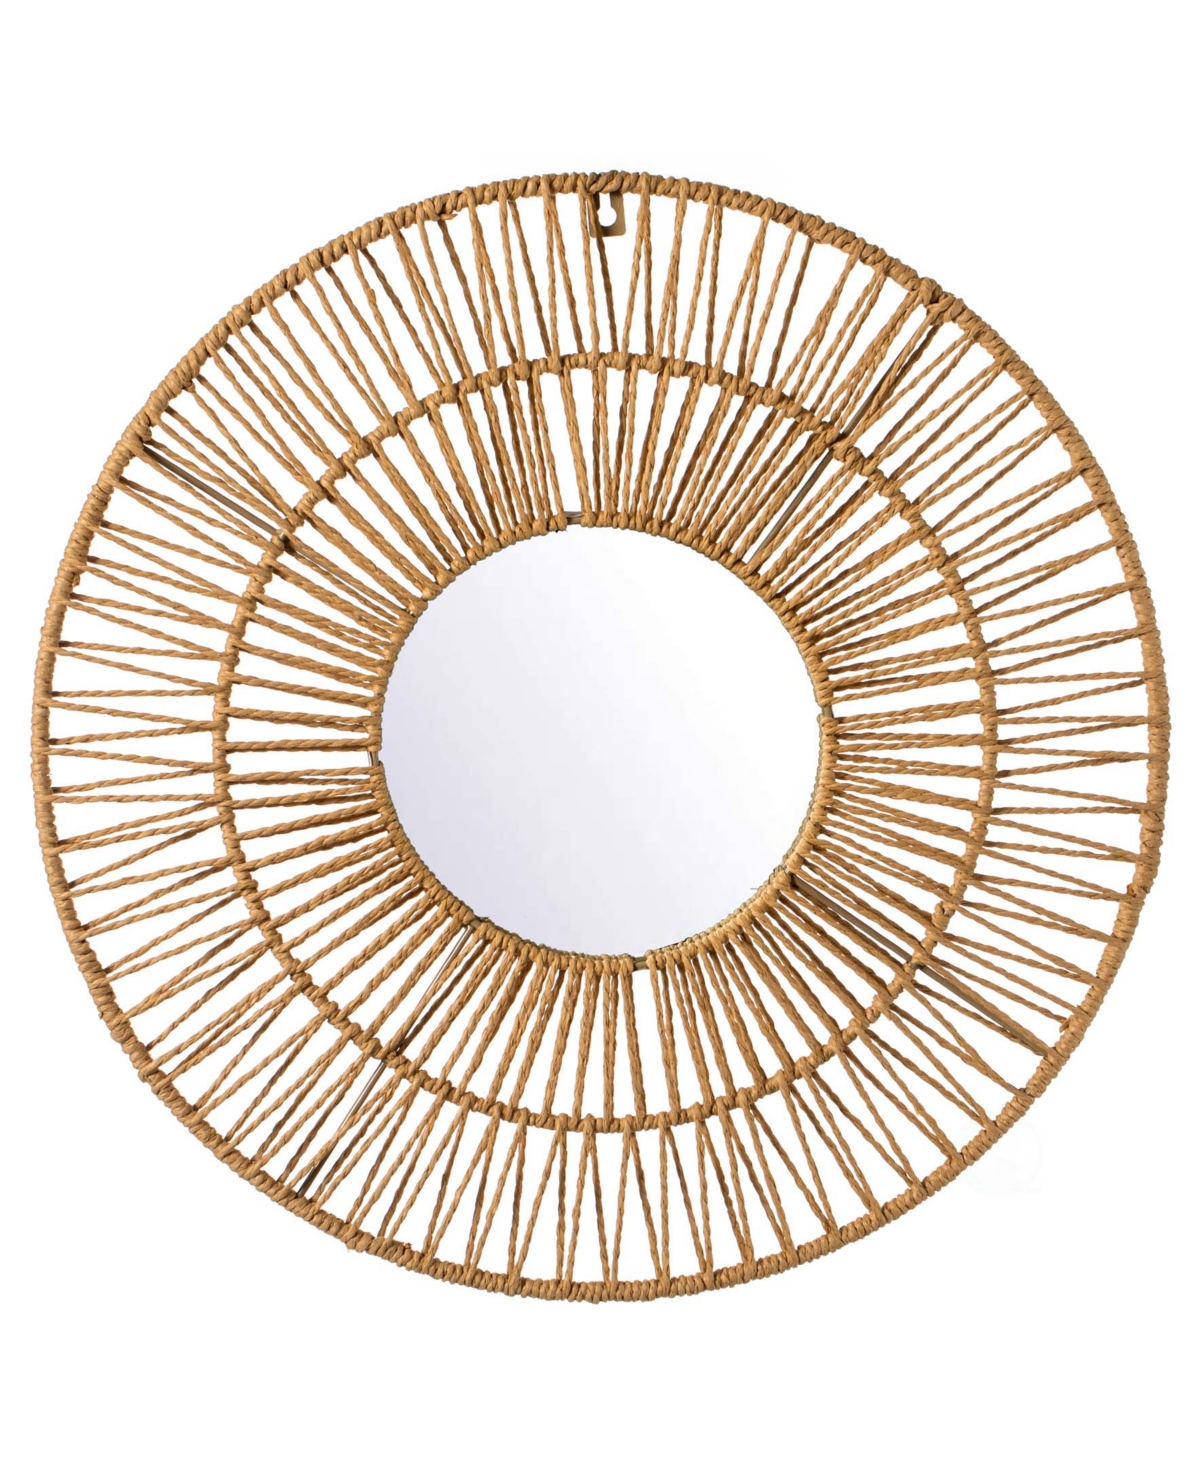 Decorative Woven Paper Rope Round Shape Modern Hanging Wall Mirror - Natural